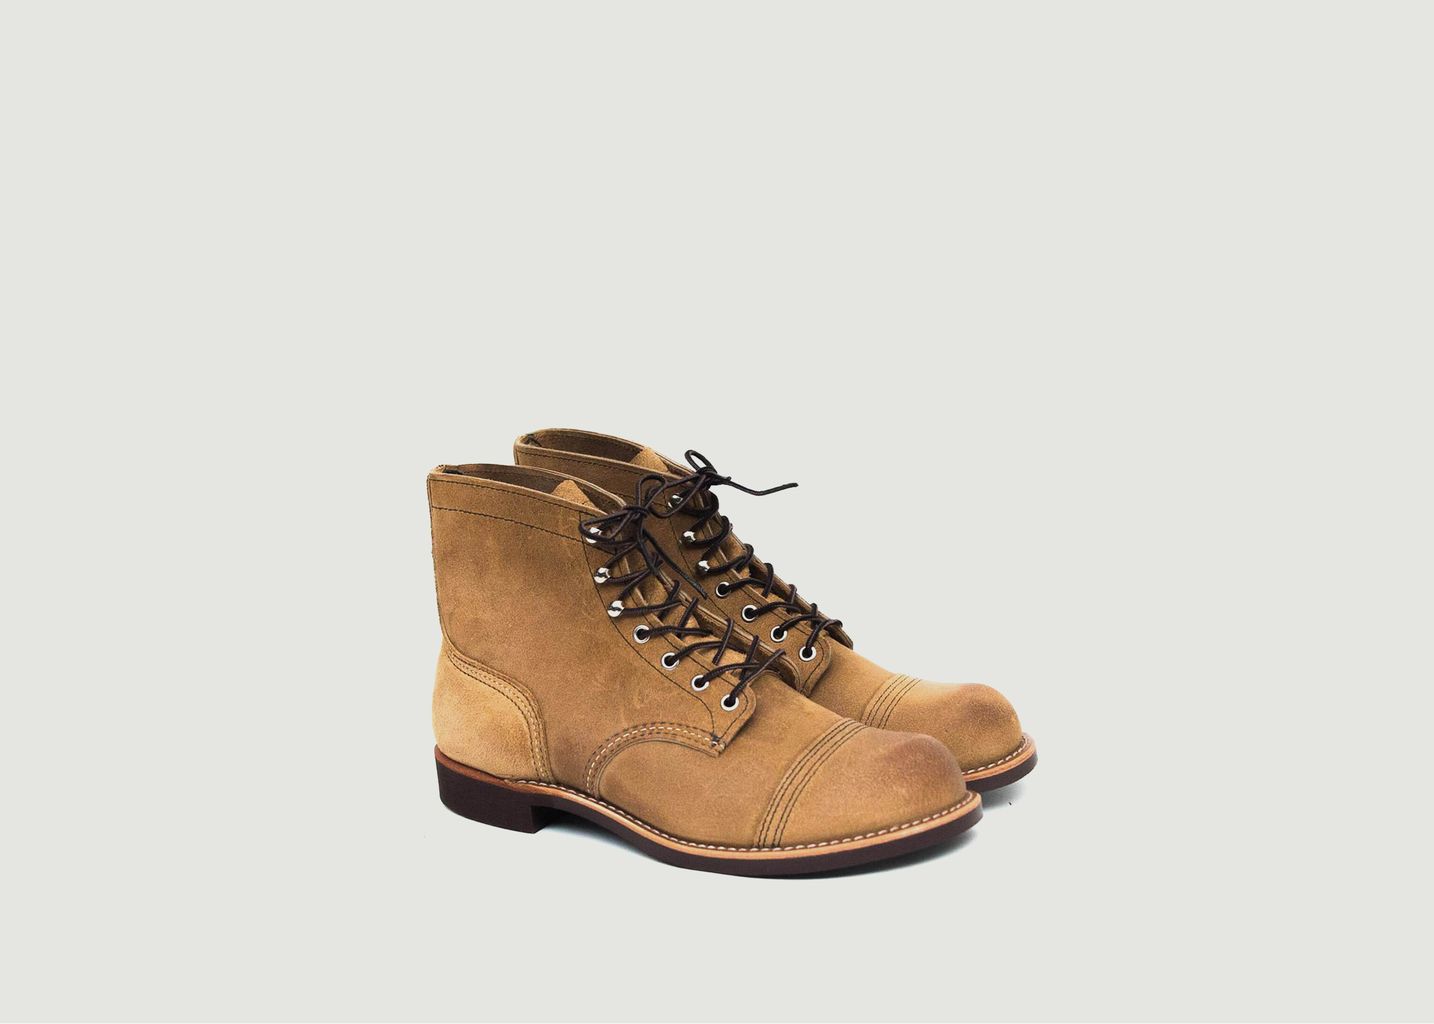 Iron ranger - Red Wing Shoes